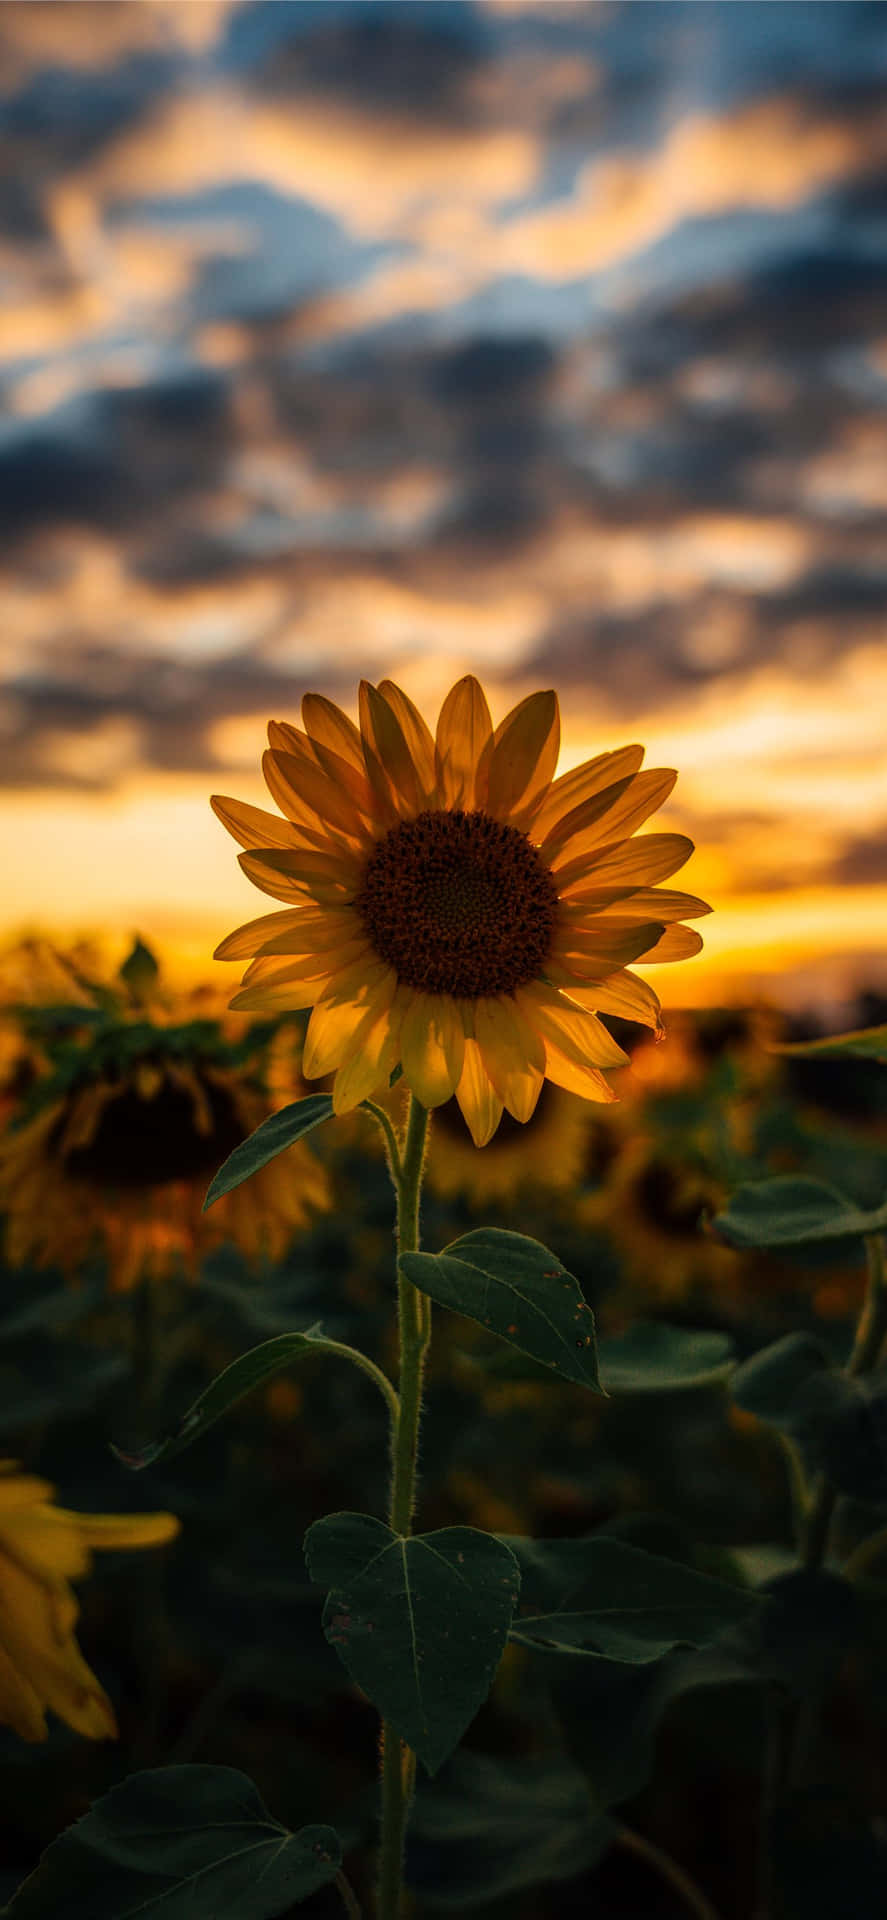 Download Enjoy the beauty of a sunflower with this sunflower aesthetic iPhone wallpaper. Wallpaper